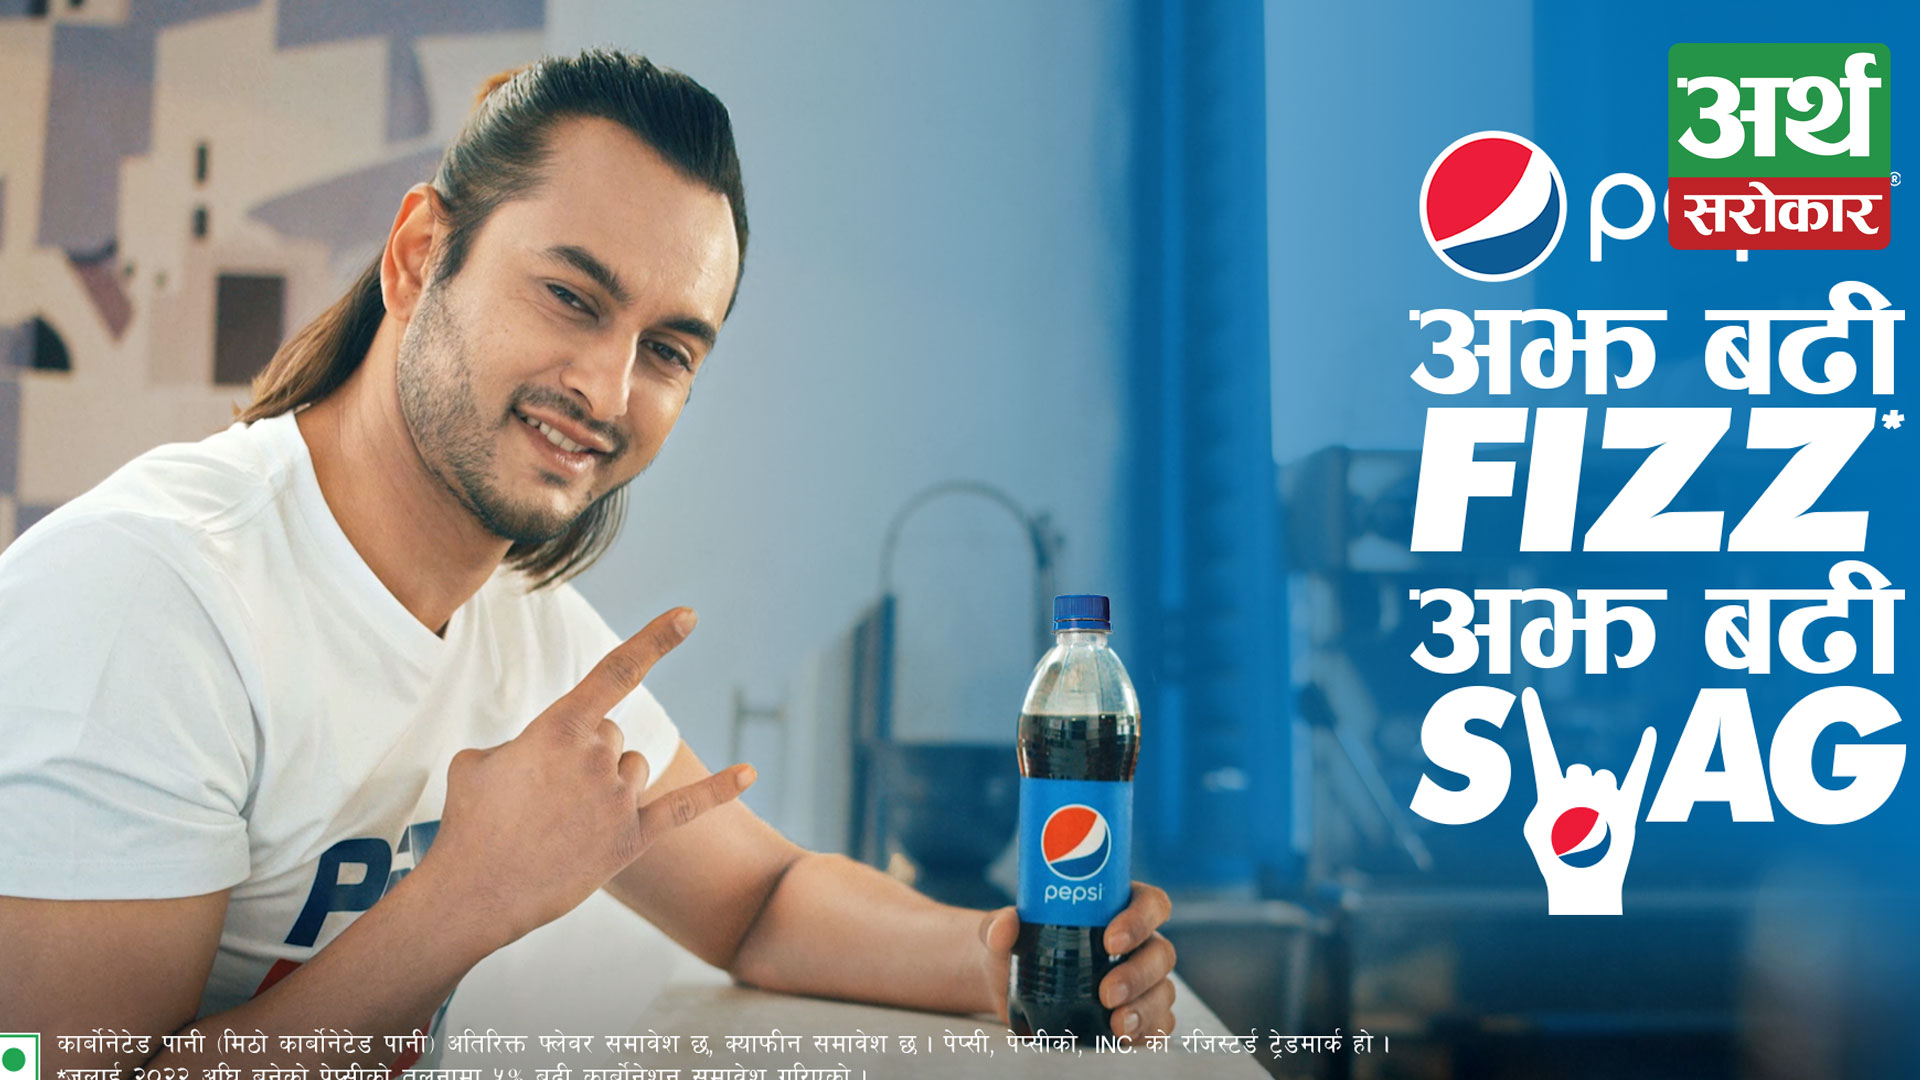  LIVES UP TO ITS PROMISE OF MORE FIZZ, MORE REFRESHING : PEPSI